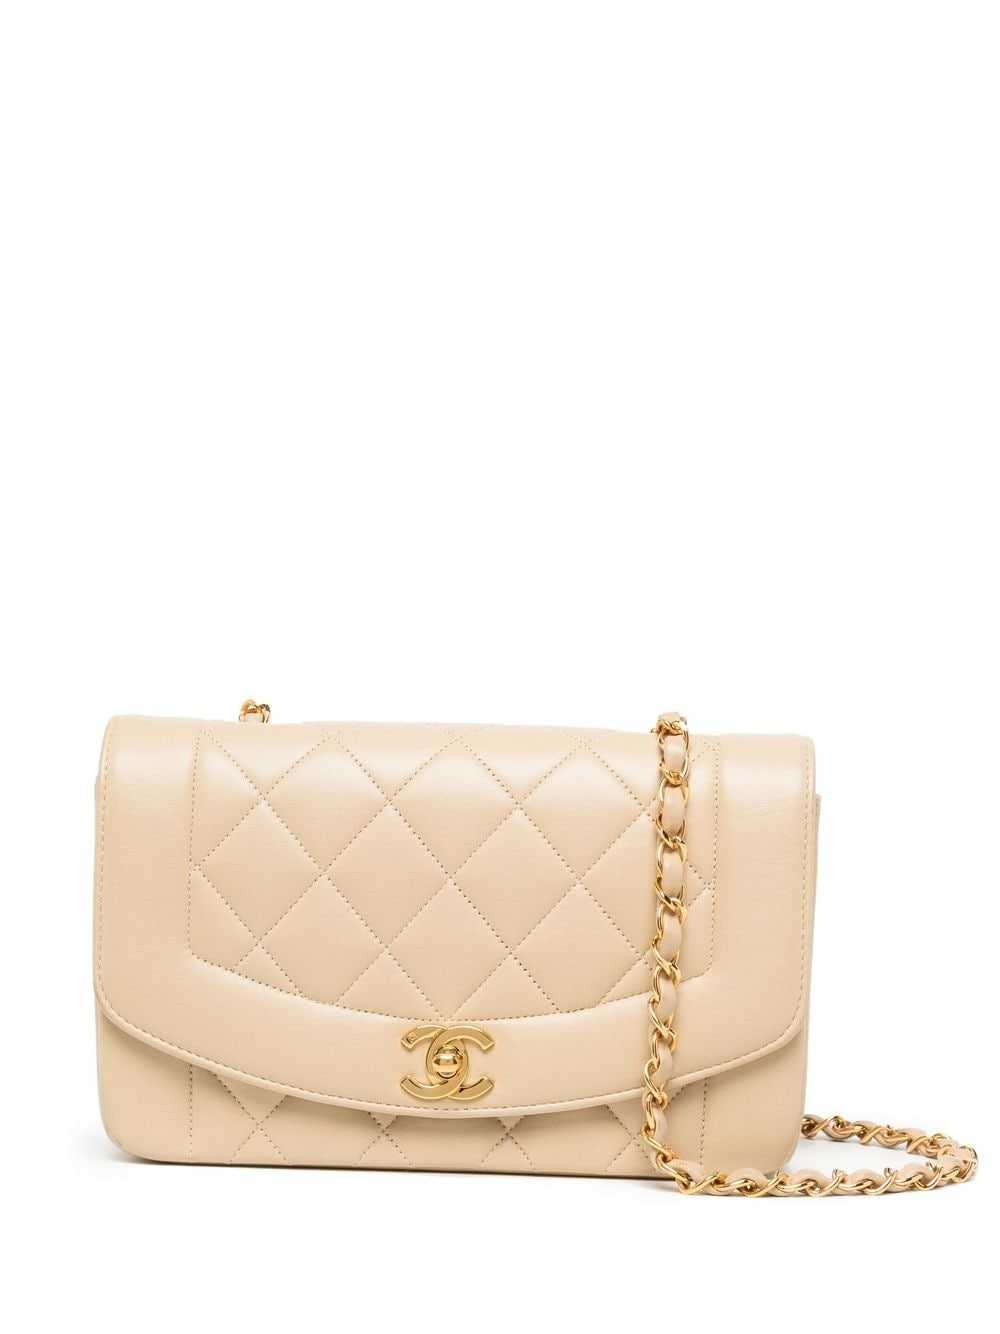 Black Quilted Calfskin Logo Bowler Weekend Bag Gold Hardware, 1994-1996, Handbags & Accessories, The Chanel Collection, 2022